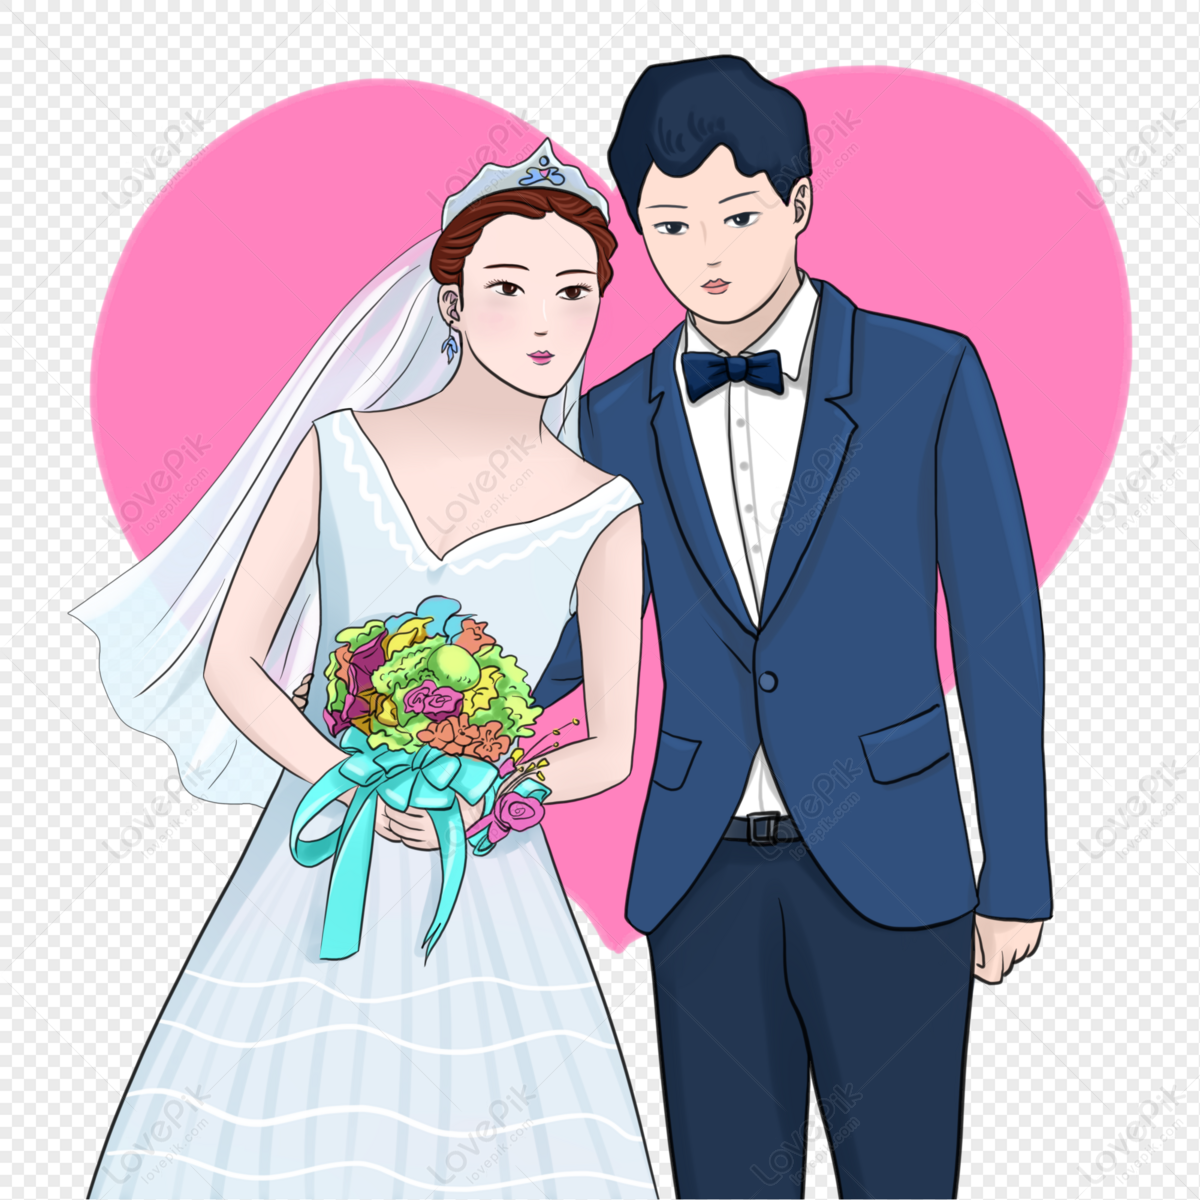 Chinese Valentines Day Wedding Couple PNG Hd Transparent Image And ...